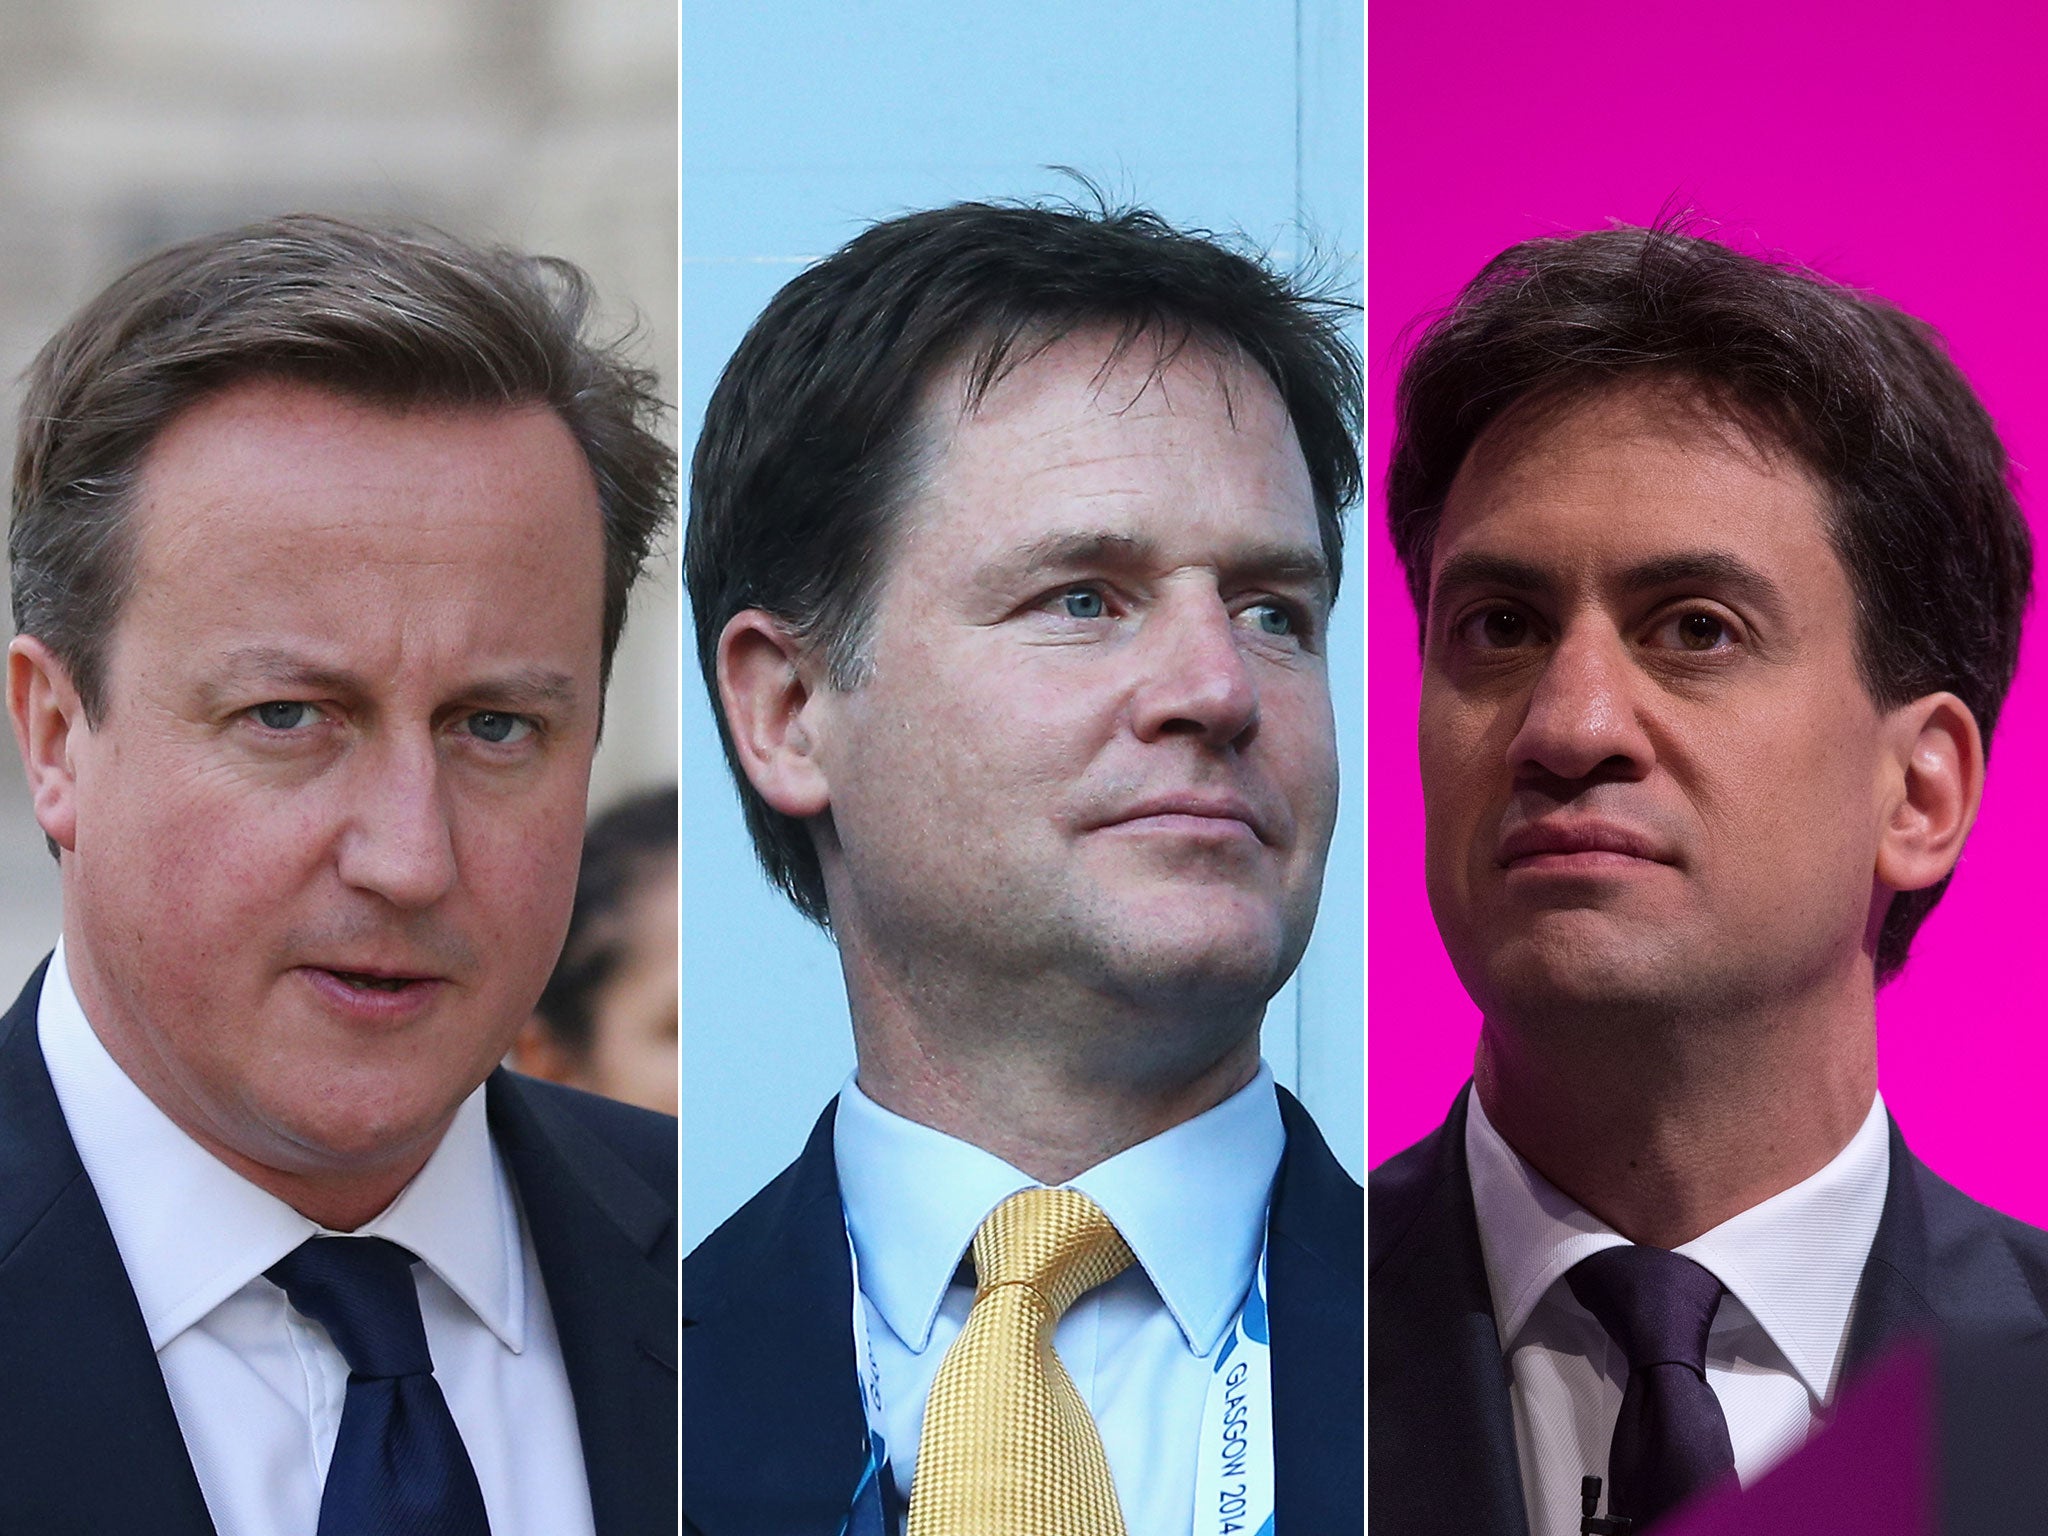 David Cameron, Nick Clegg and Ed Miliband put aside their political differences to pledge their support for the campaign